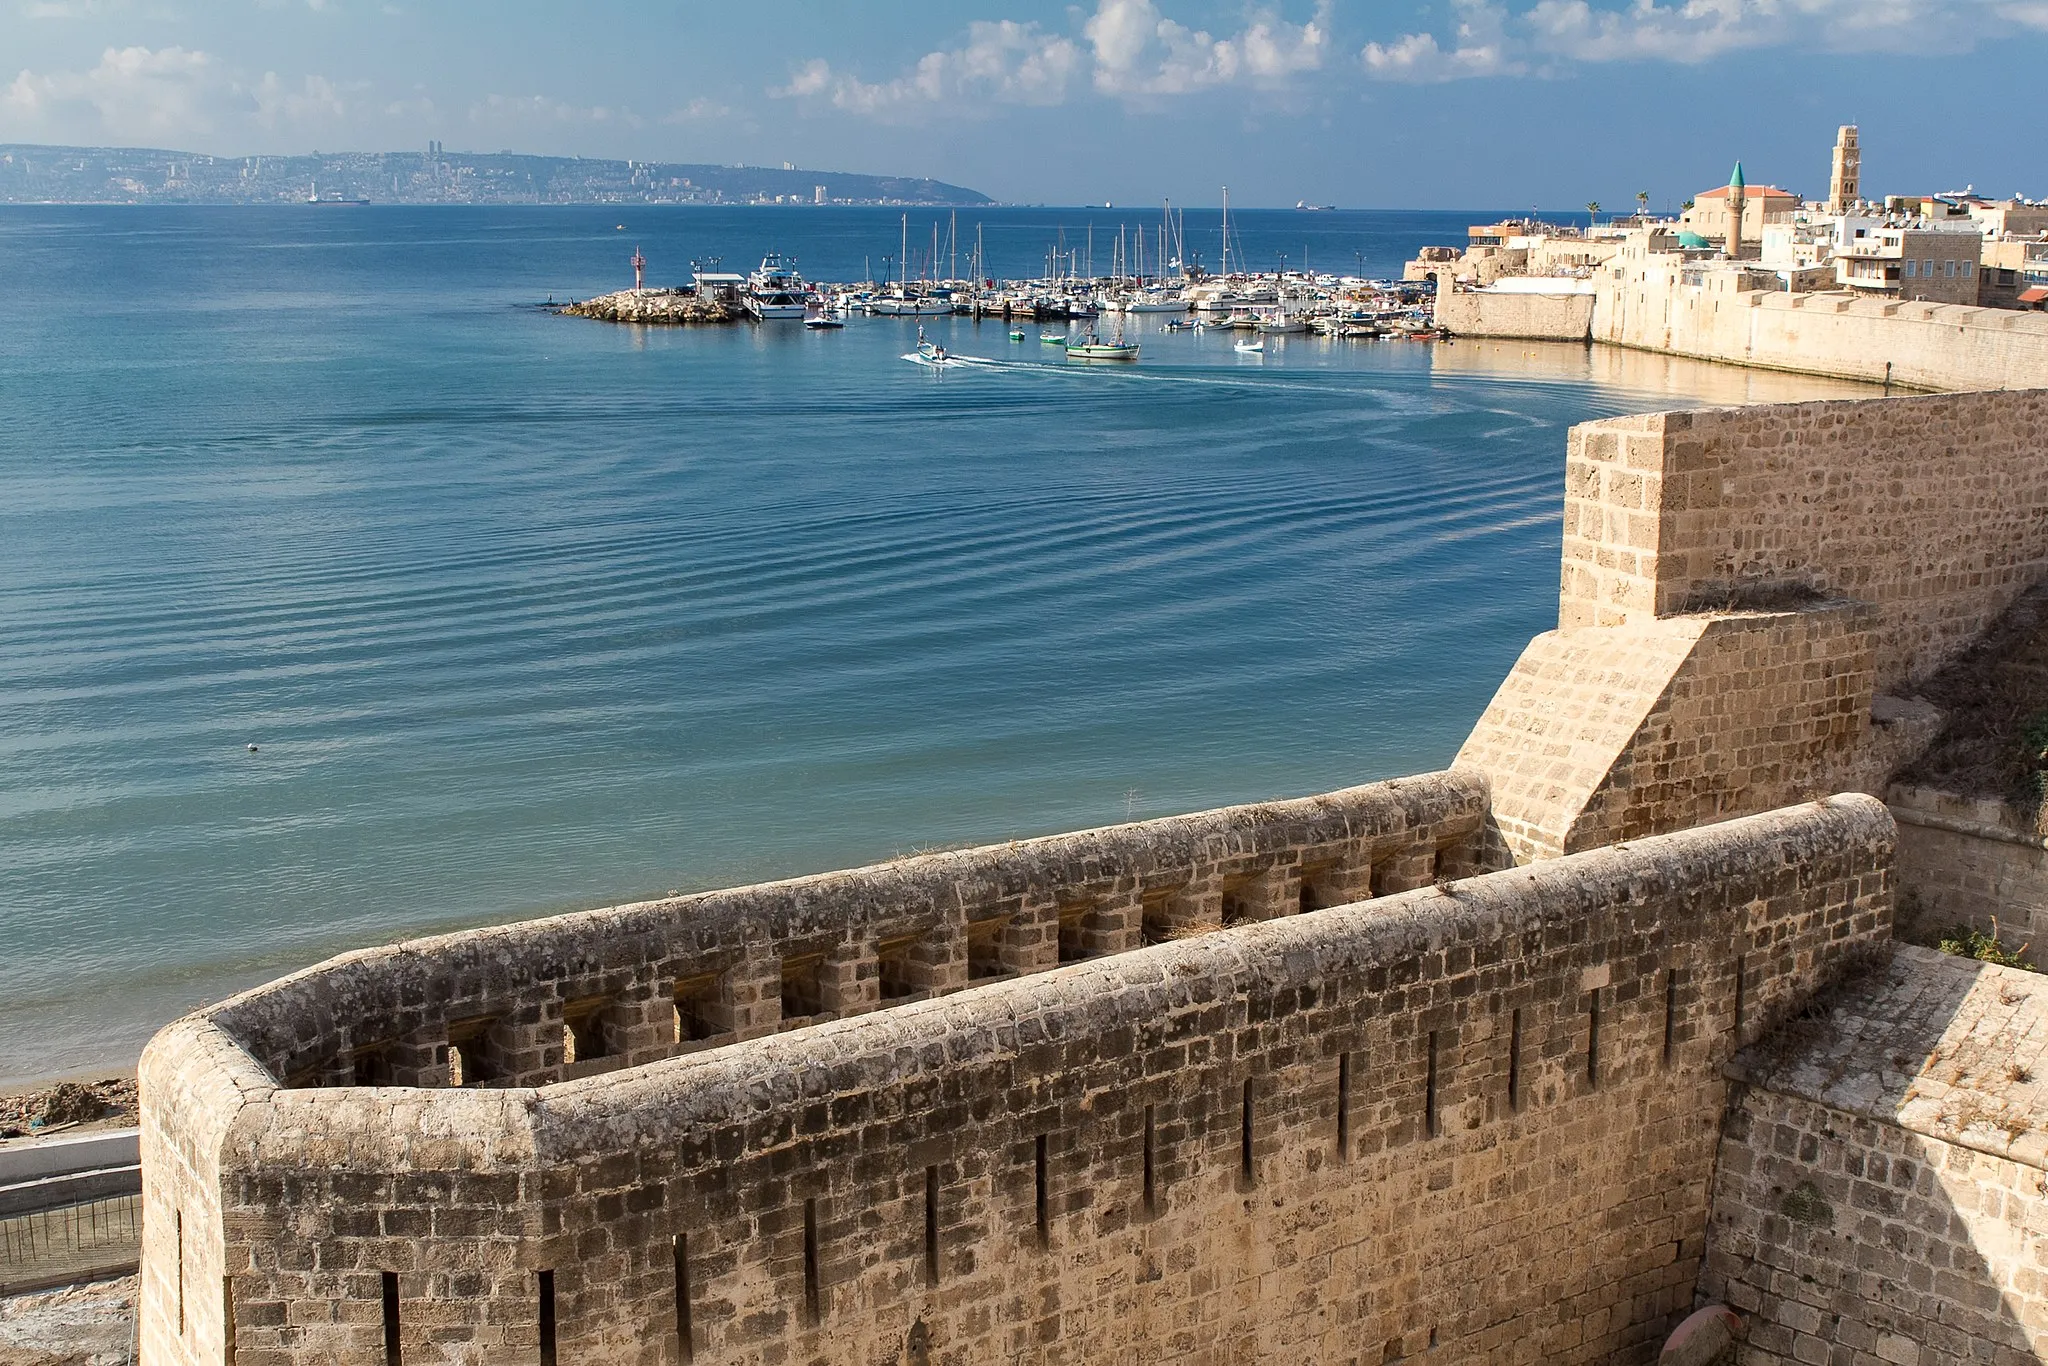 Photo showing: Fortifications and port of the old city of Acre,Israel